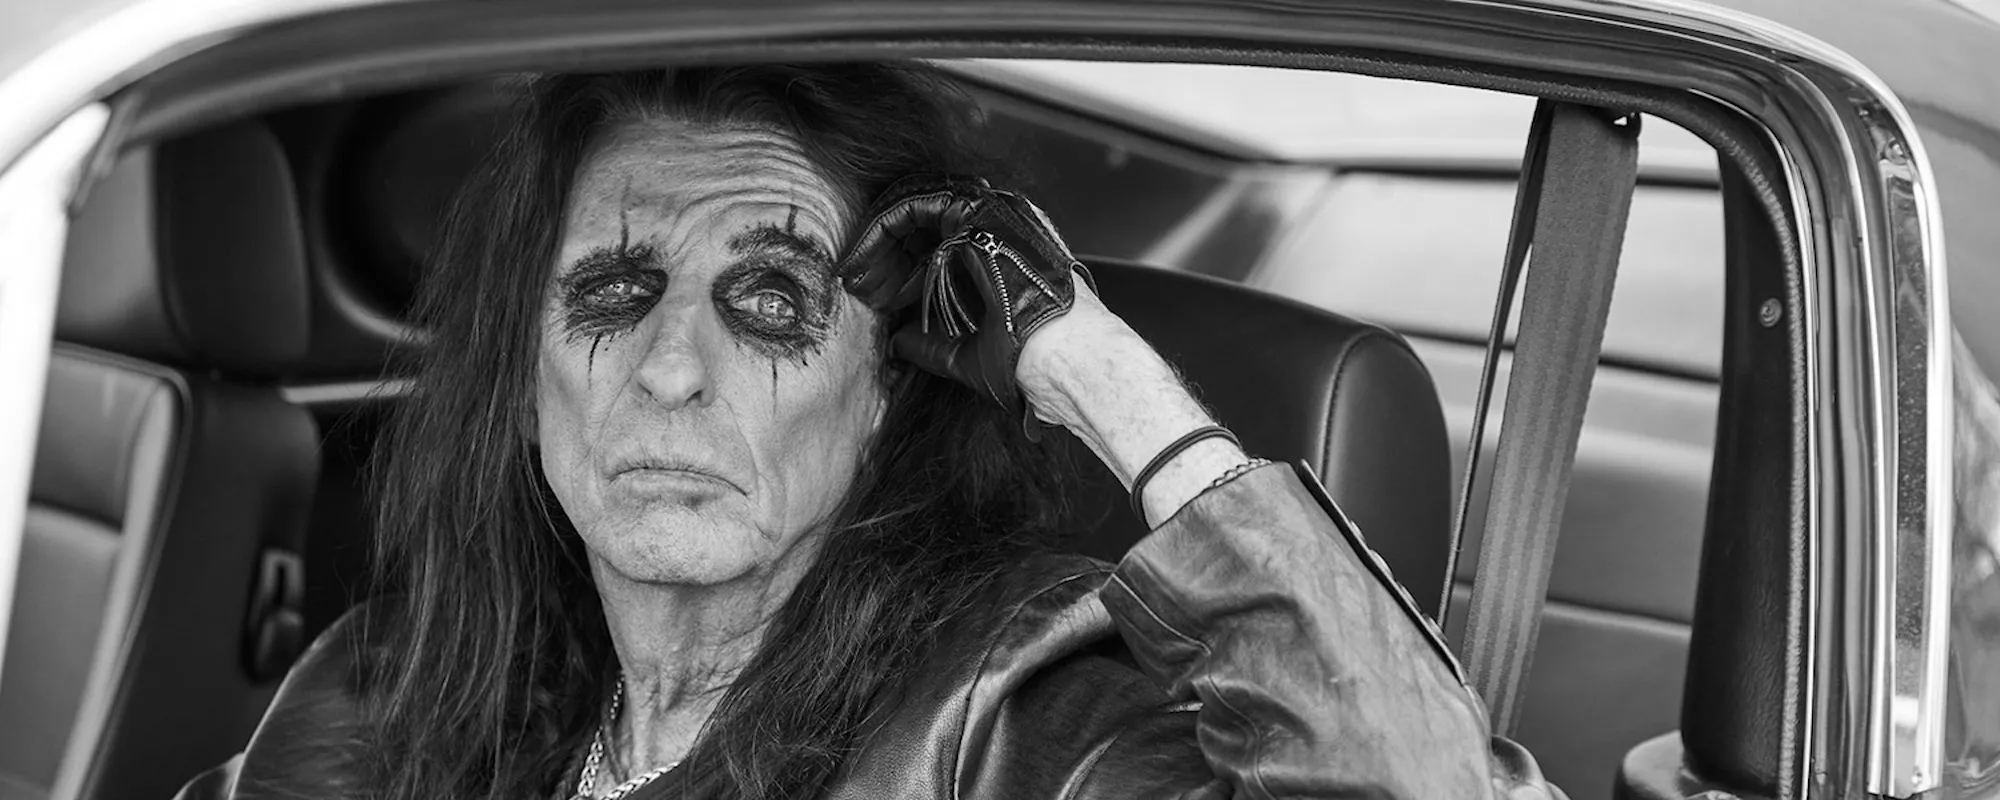 New Music Competition Show ‘No Cover’ Features Rockers Alice Cooper, Gavin Rossdale and More